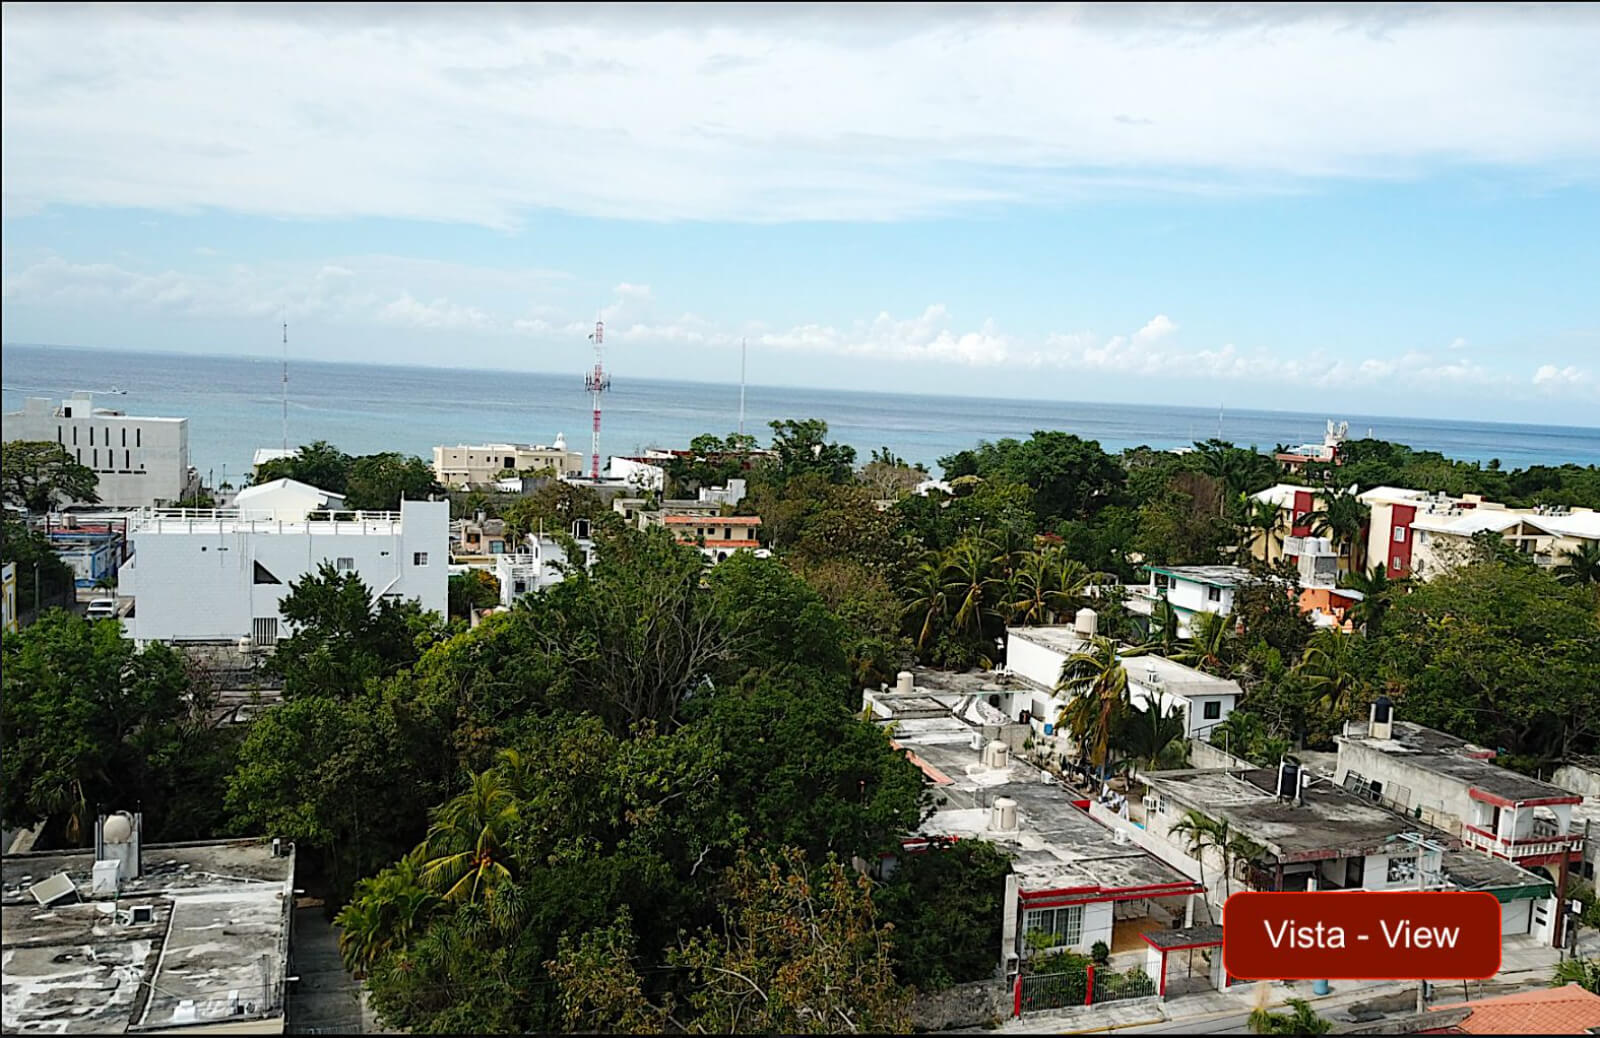 Oceanfront apartment with pool for adults and children, wine cellar, sky lounge, snack bar, gym and more for sale, pre-construction, Cozumel